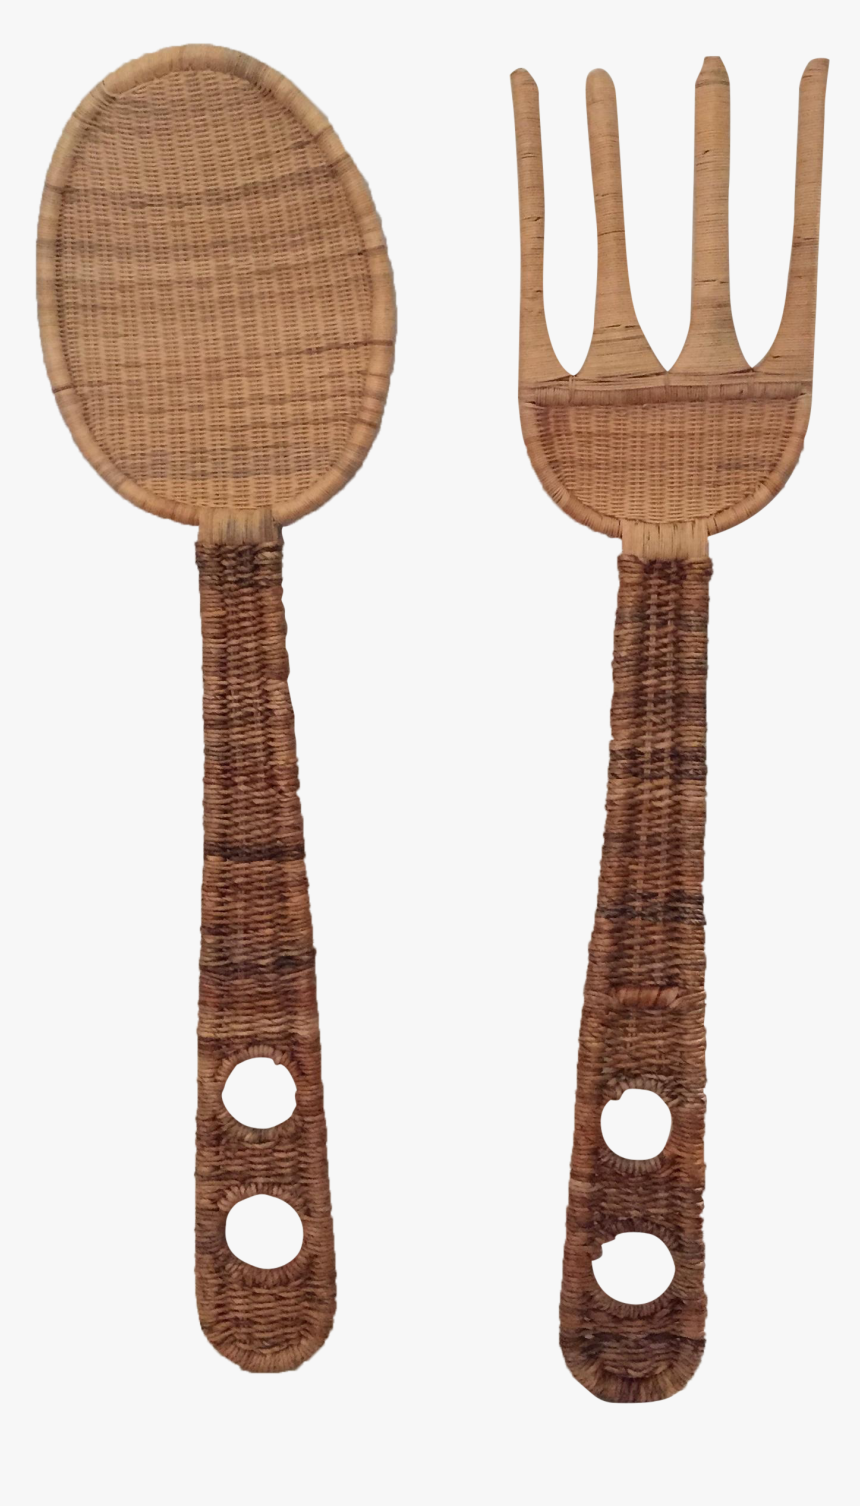 Big Wooden Spoon And Fork - Rattan Spoon, HD Png Download, Free Download